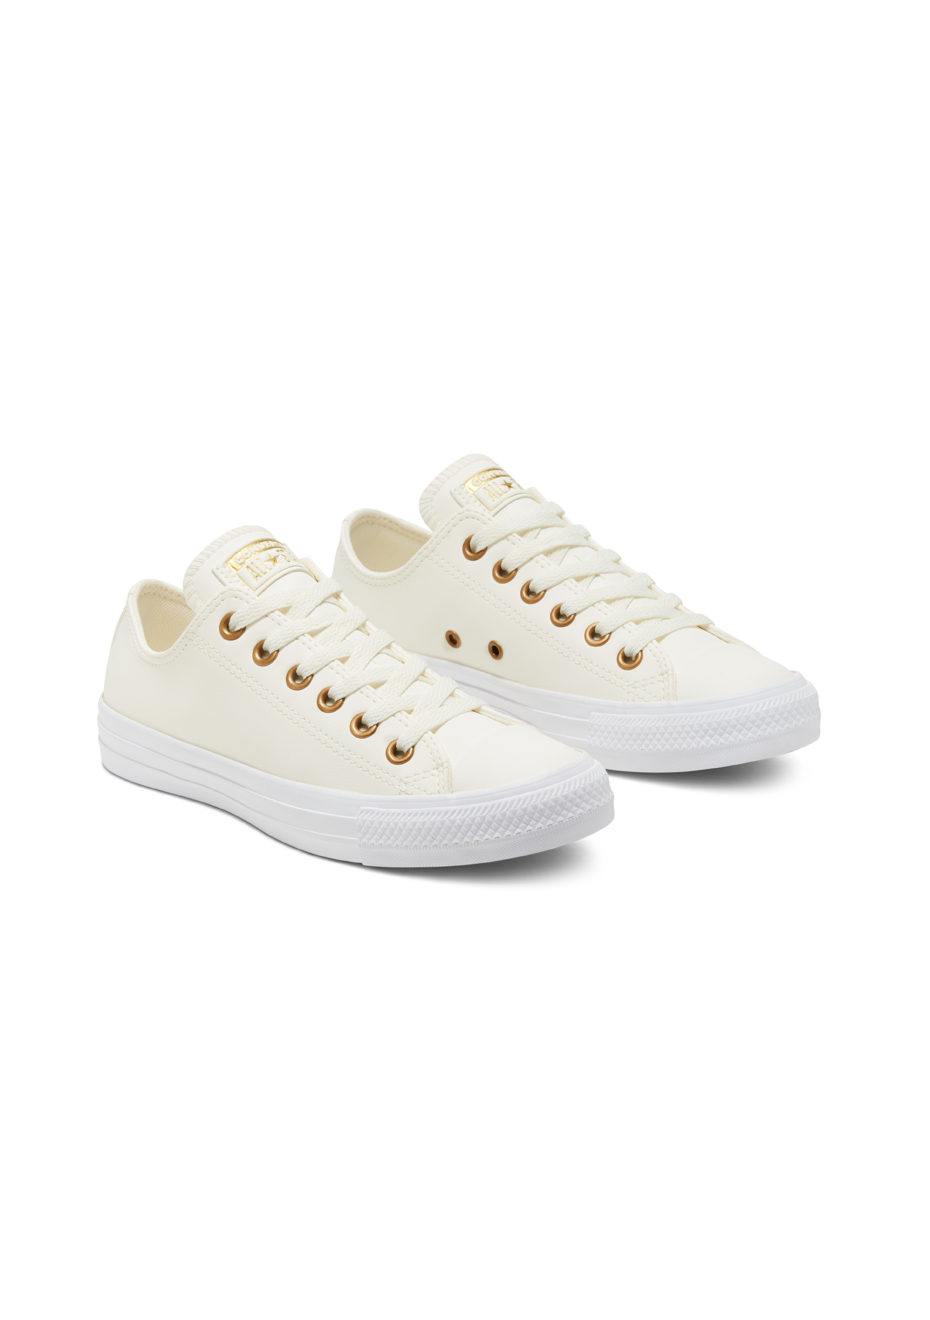 white and gold chuck taylors